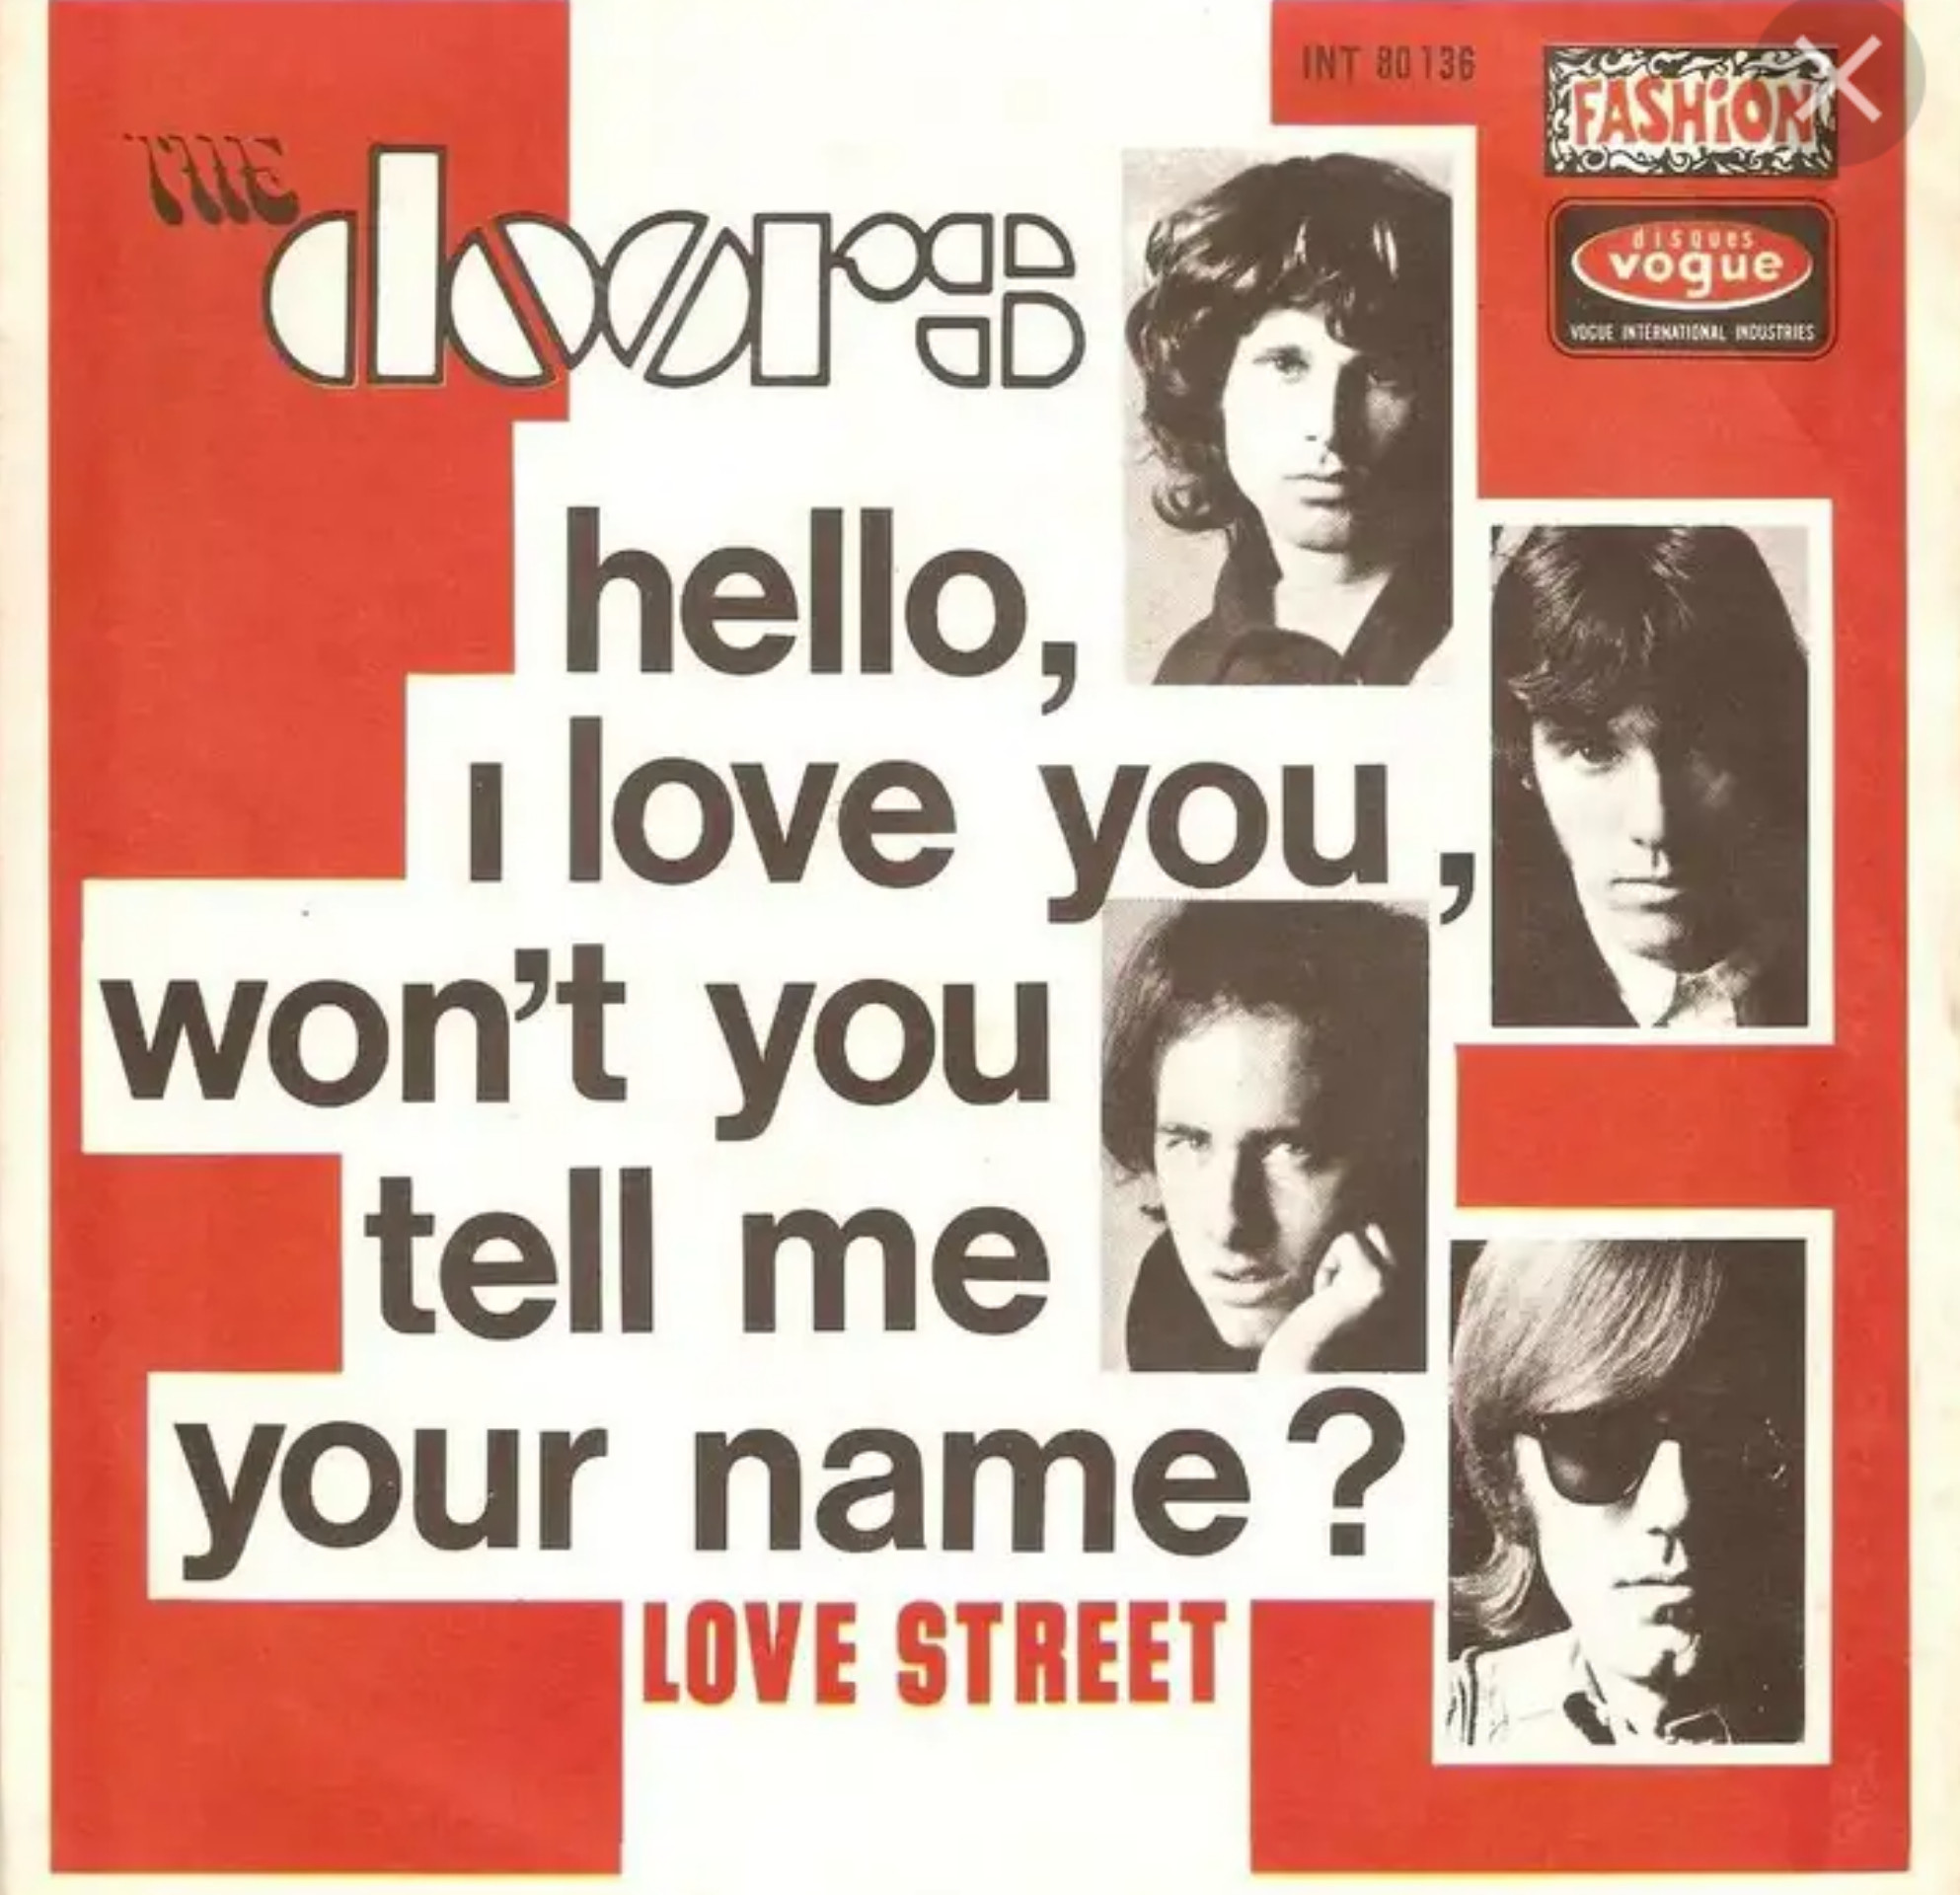 Streets love me. Hello i Love you. The Doors. The Doors i Love you. Love Street the Doors.